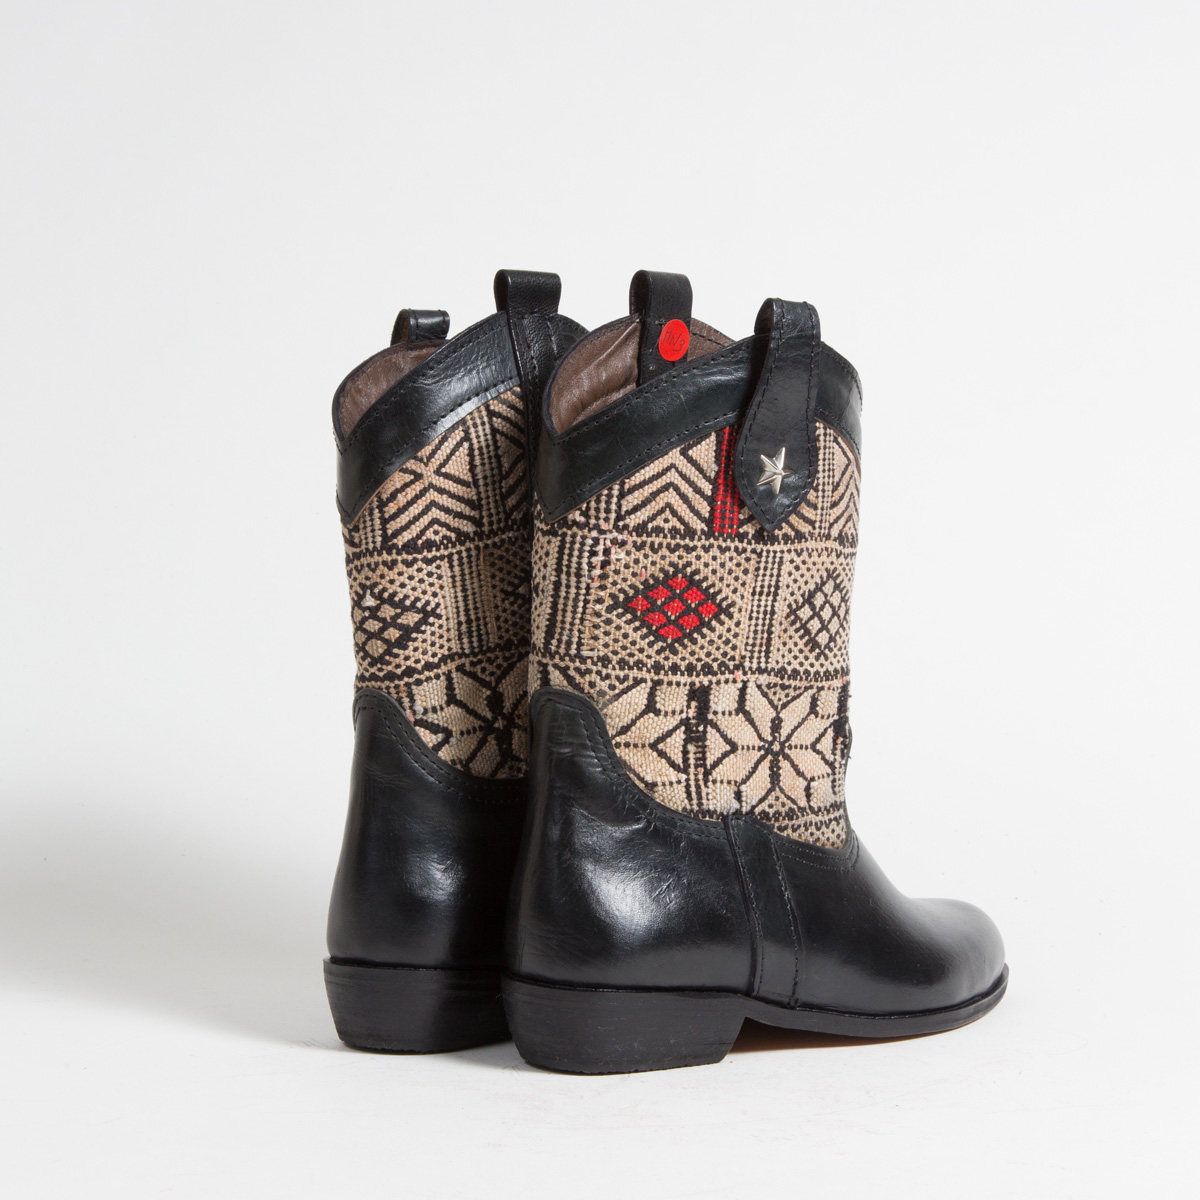 Bottines Kilim cuir mababouche artisanales (Réf. MN3-37)